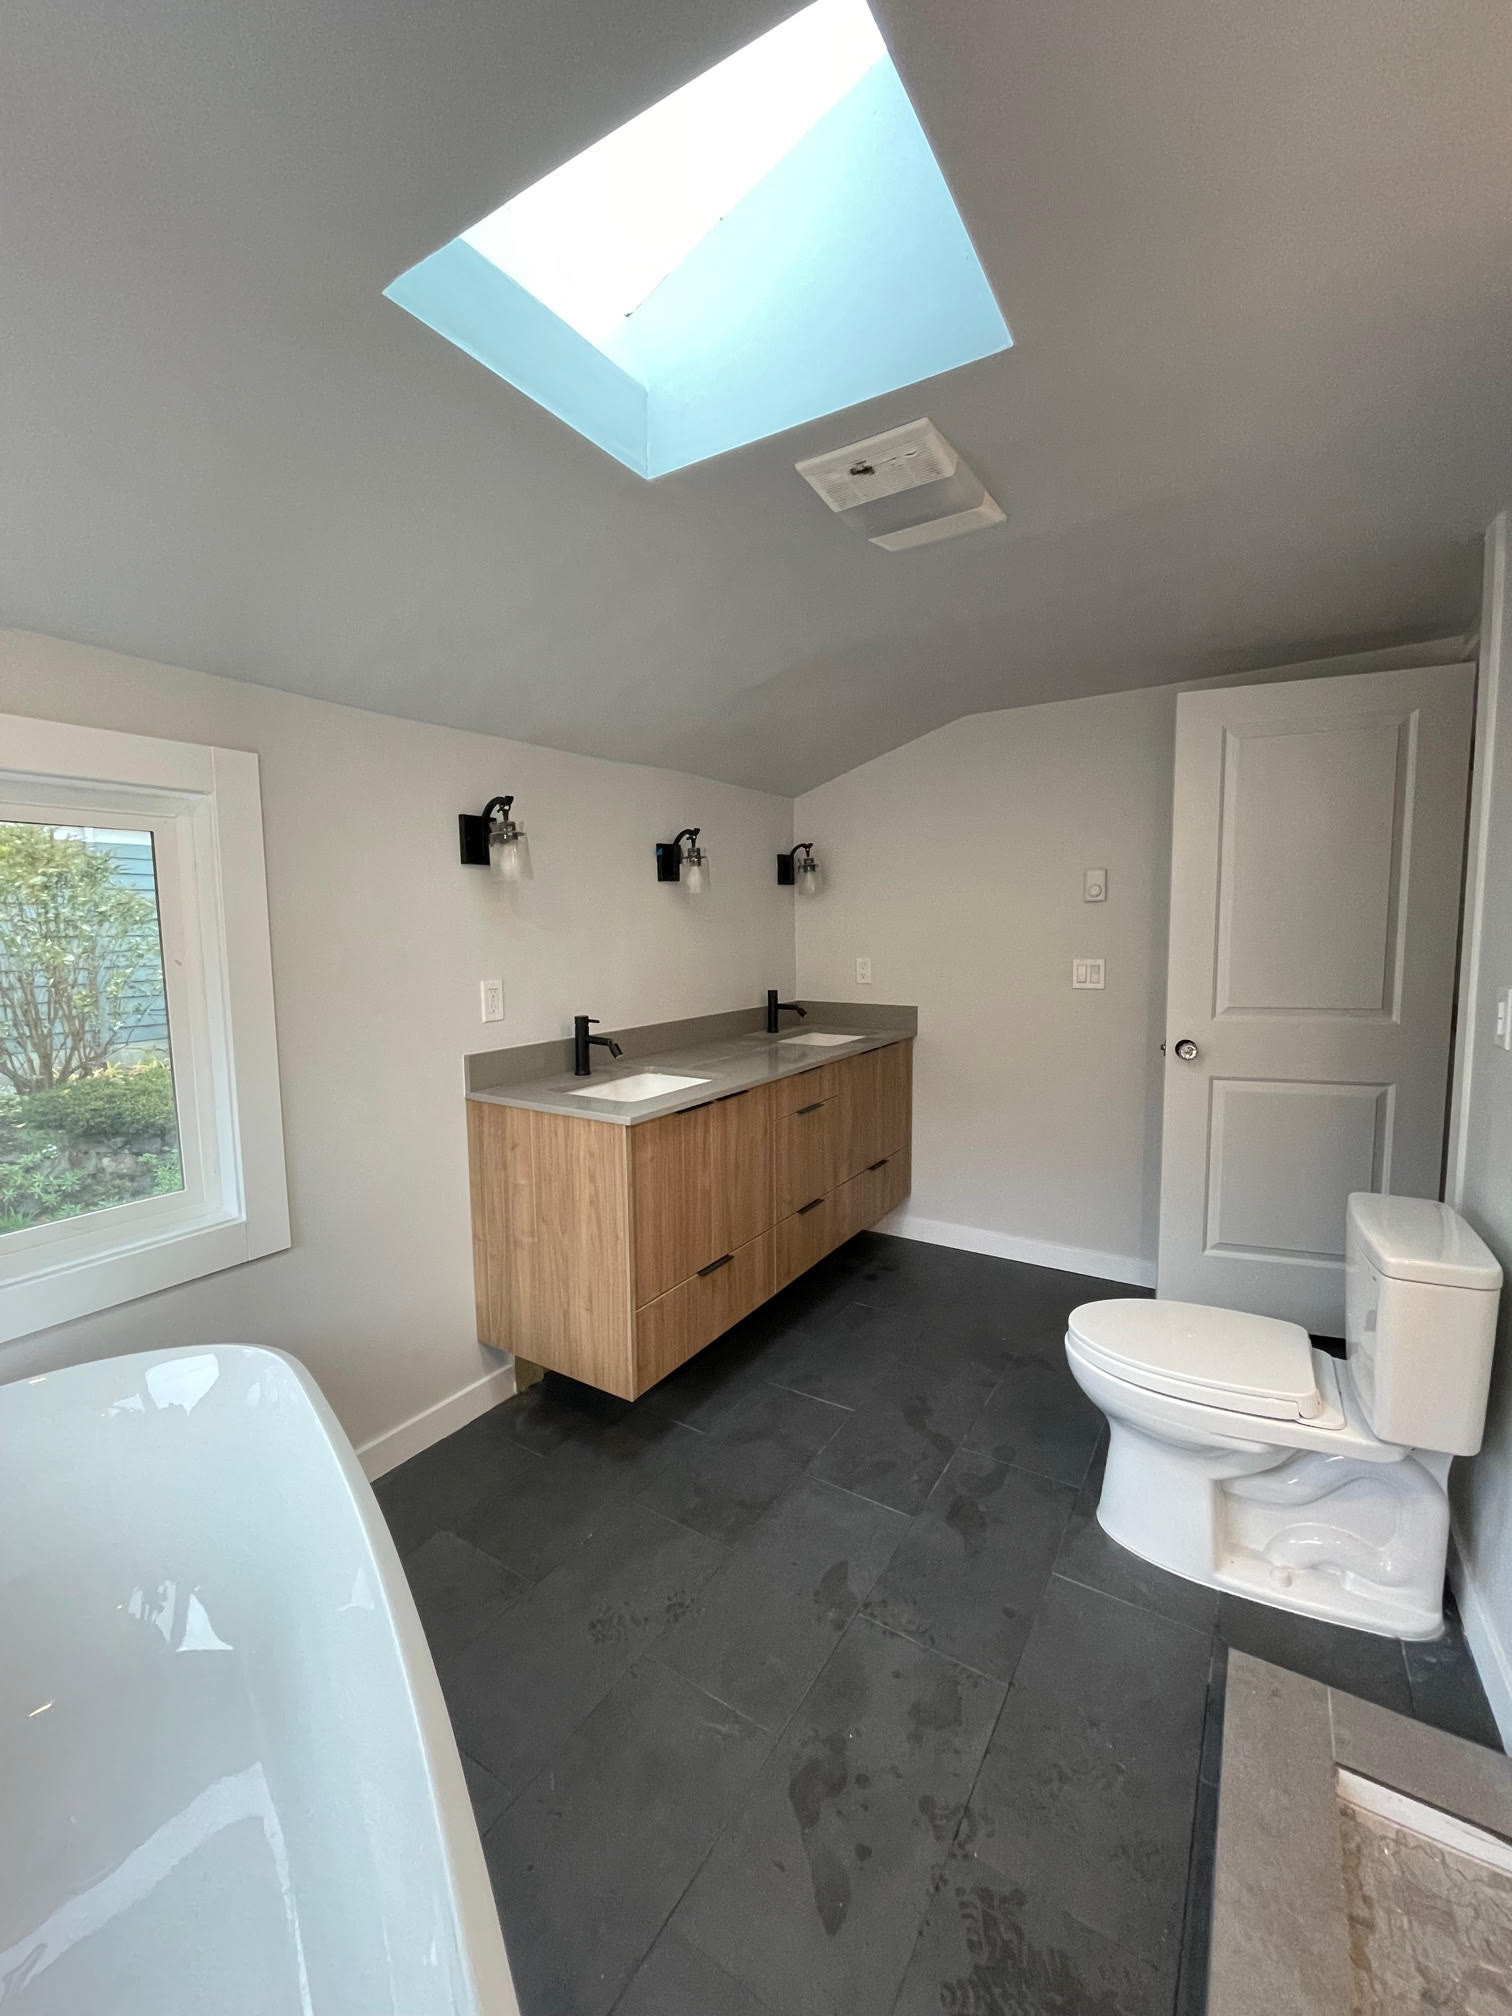 Bathroom and Home Remodel